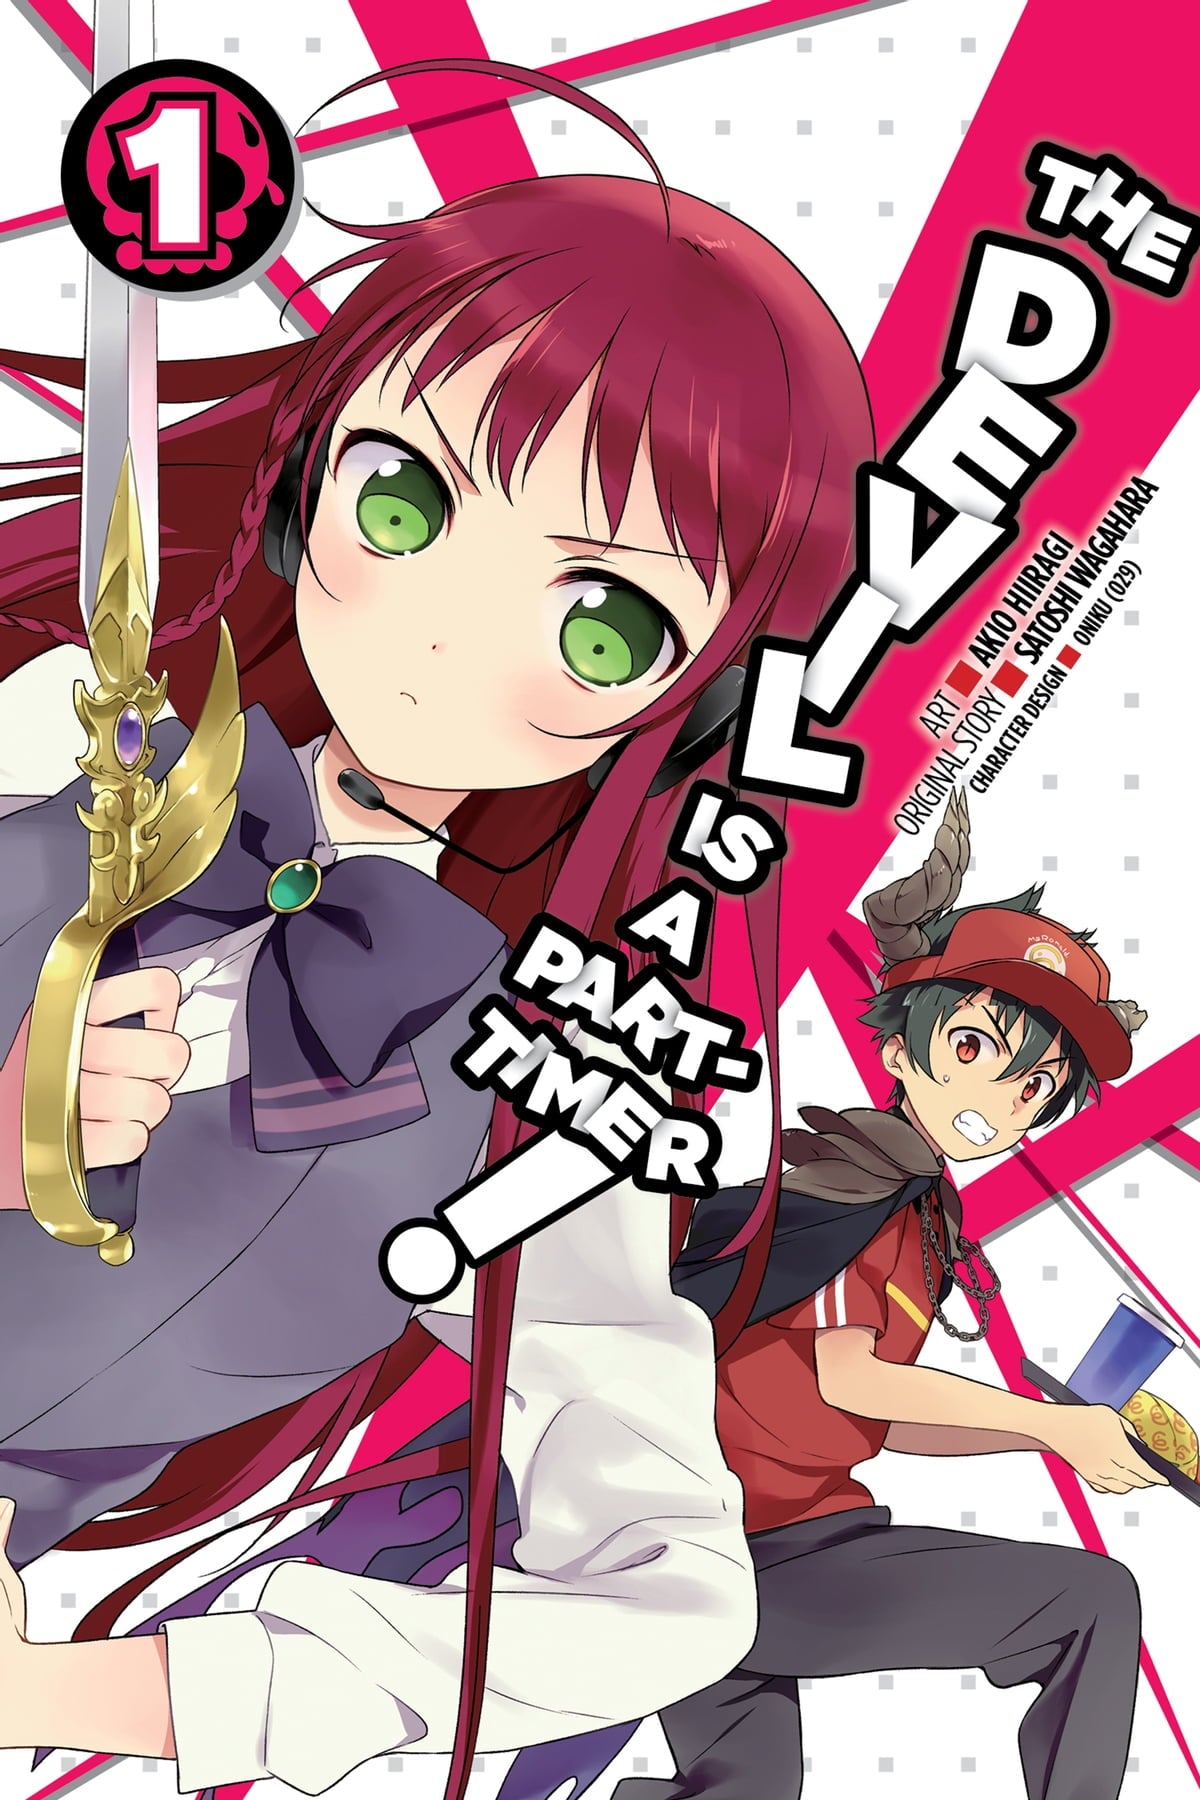 THE DEVIL IS A PART TIMER! VOL 1 By SATOSHI WAGAHARA